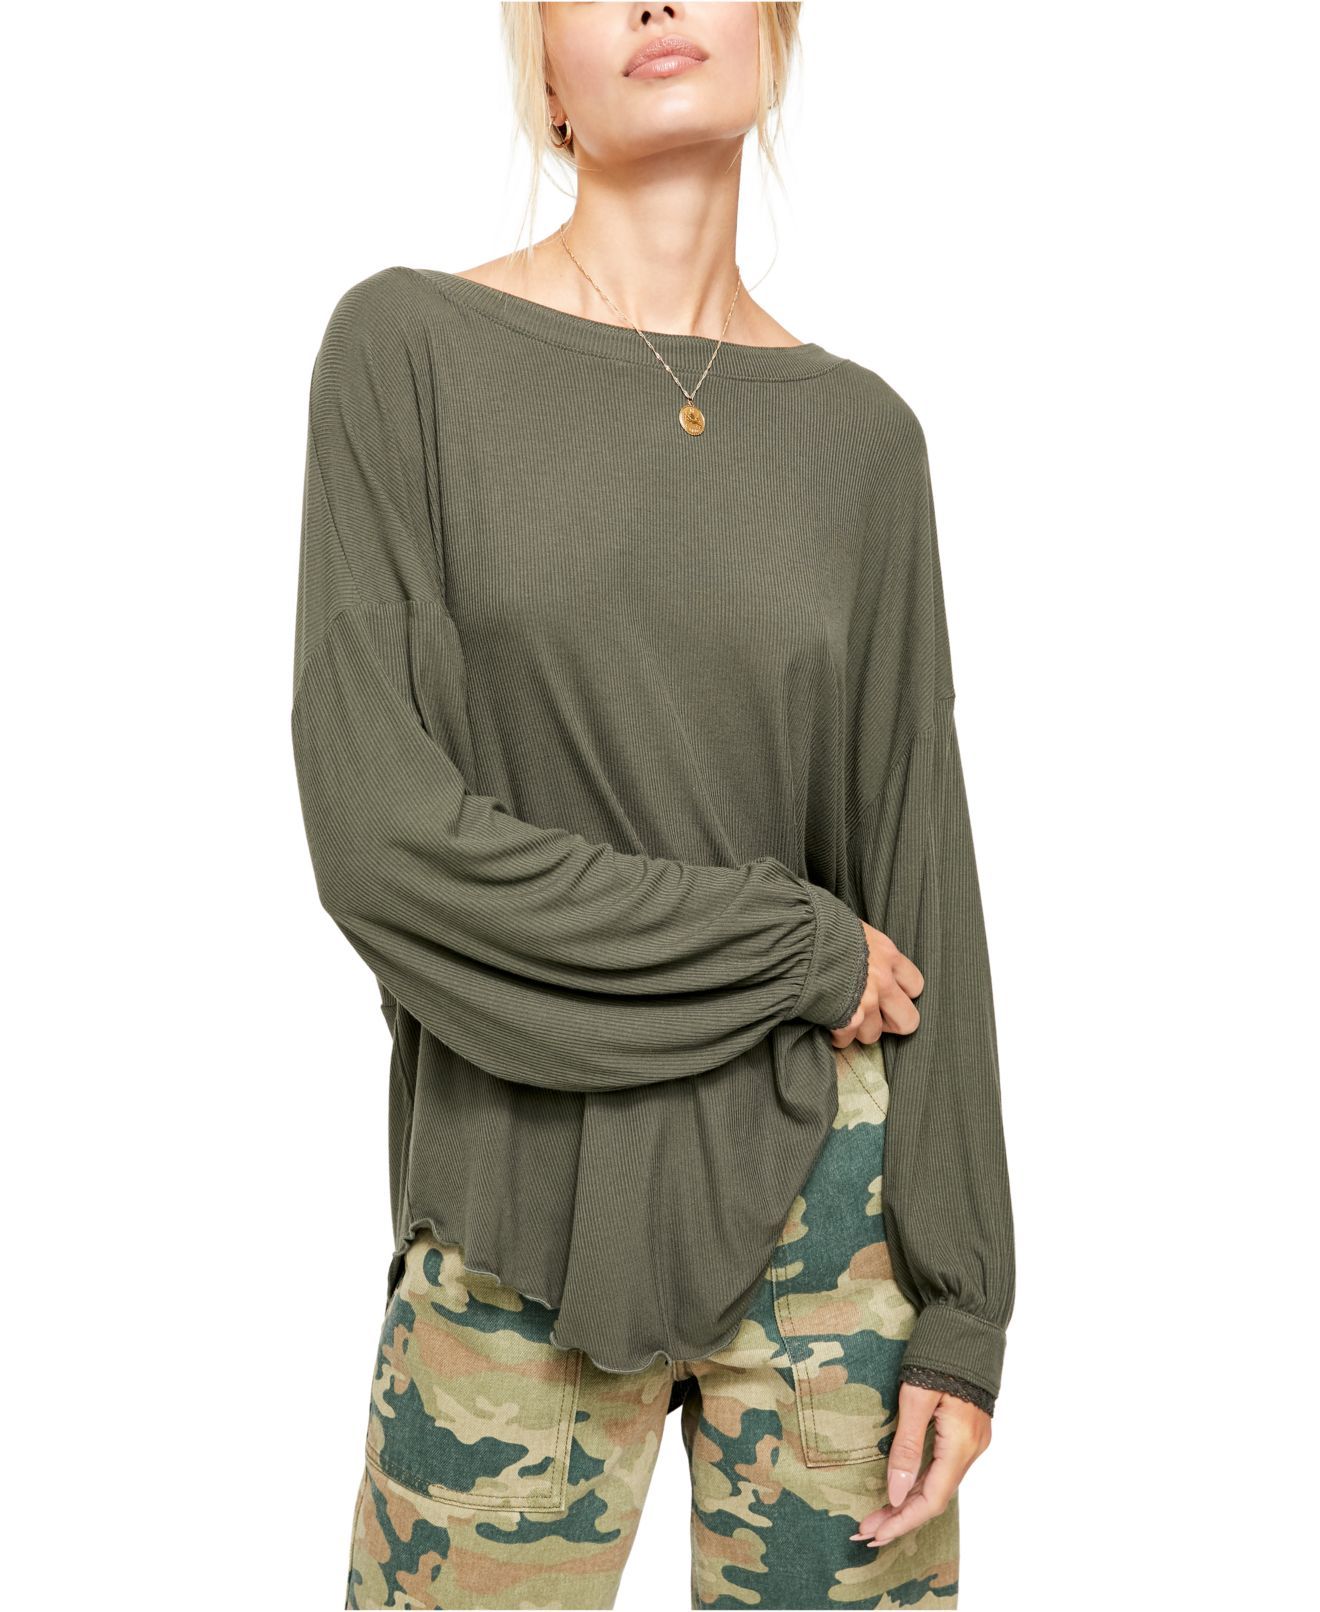 Color: Greens Size Type: Regular Size (Women's): L Sleeve Length: Long Sleeve Type: T-Shirt Style: Knit Top Neckline: Boat Neck Pattern: Solid Theme: Outdoor Material: Rayon